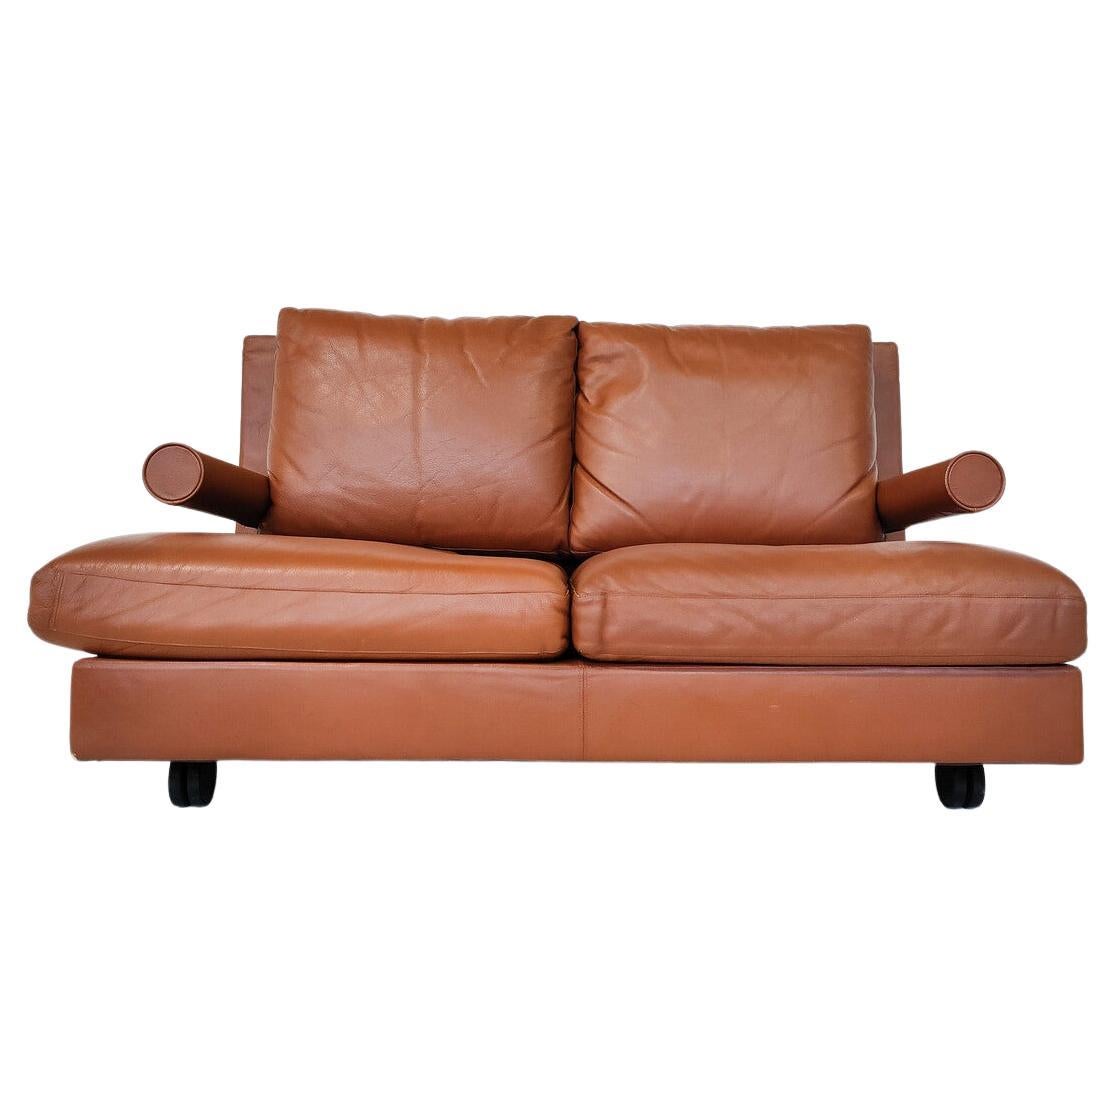 Mid-Century Modern Baisity Two Seater Sofa by Antonio Citterio for B&B Italia For Sale